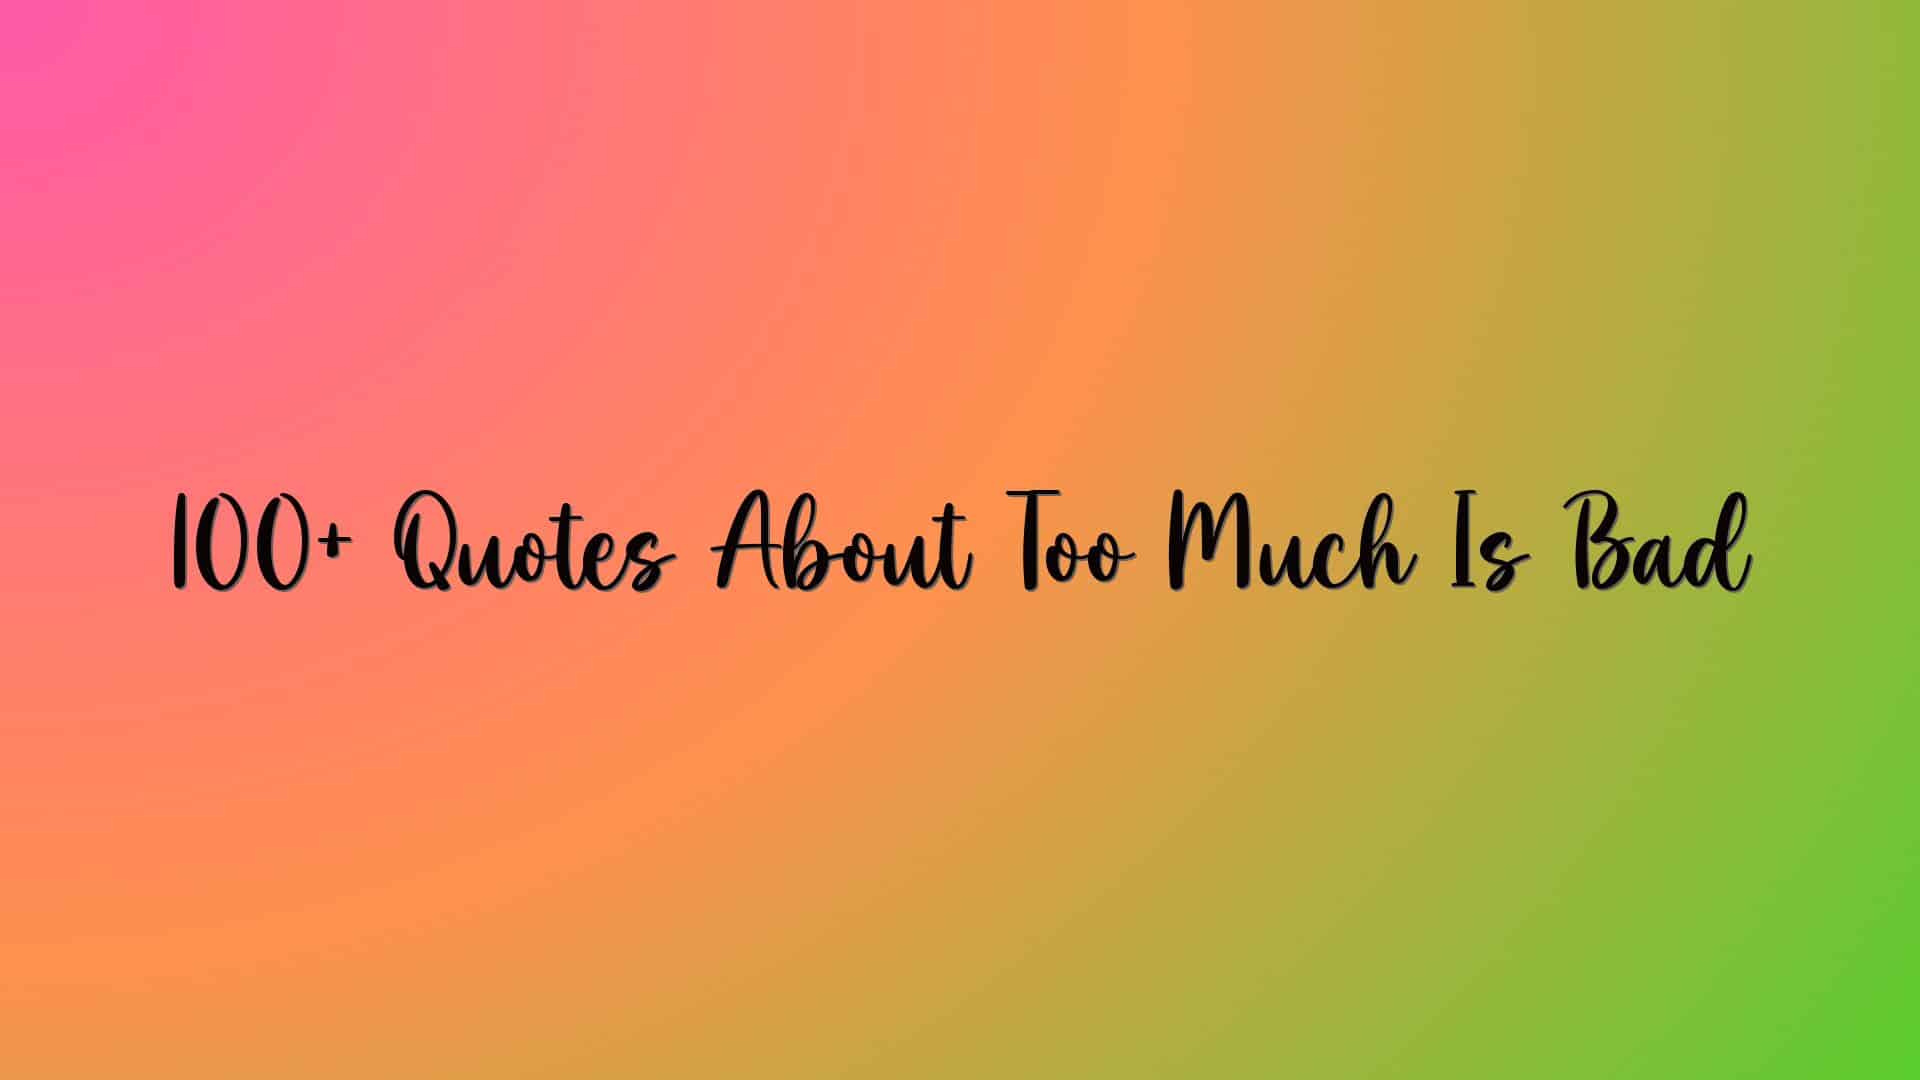 100+ Quotes About Too Much Is Bad